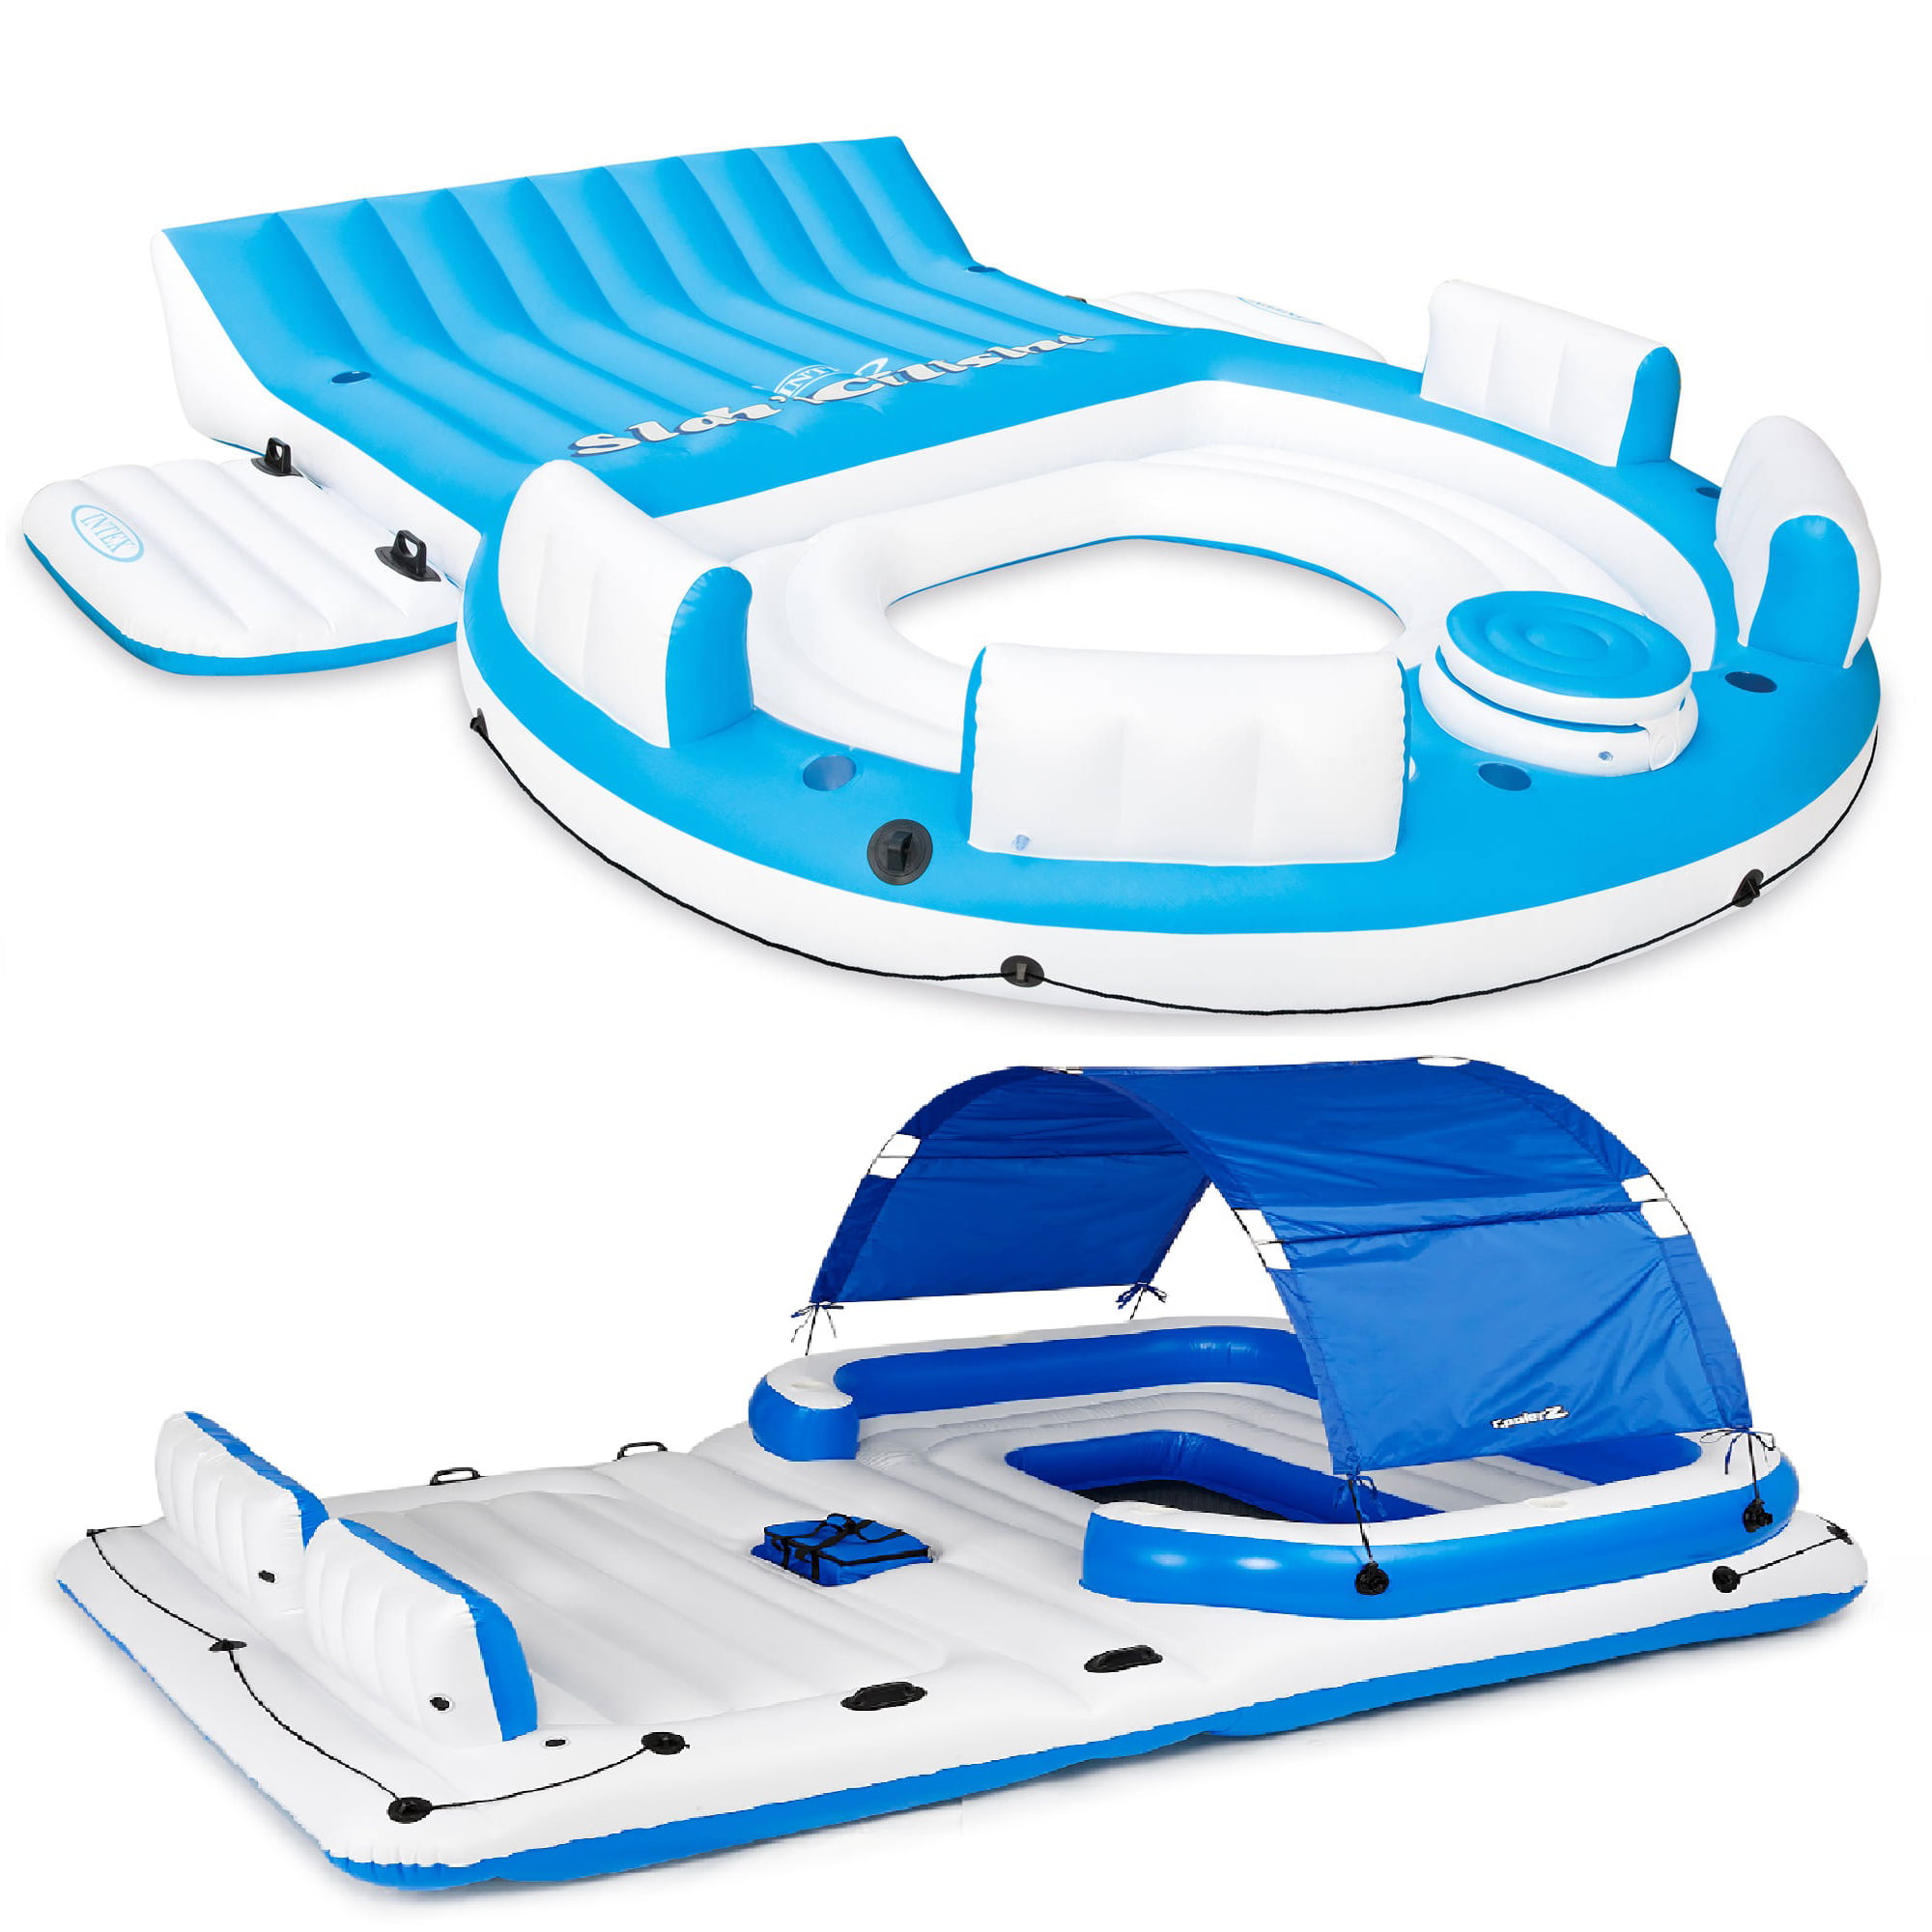 Floating Island Inflatable Pool Lounge For Adults Home Outdoor Summer Fun Canopy 